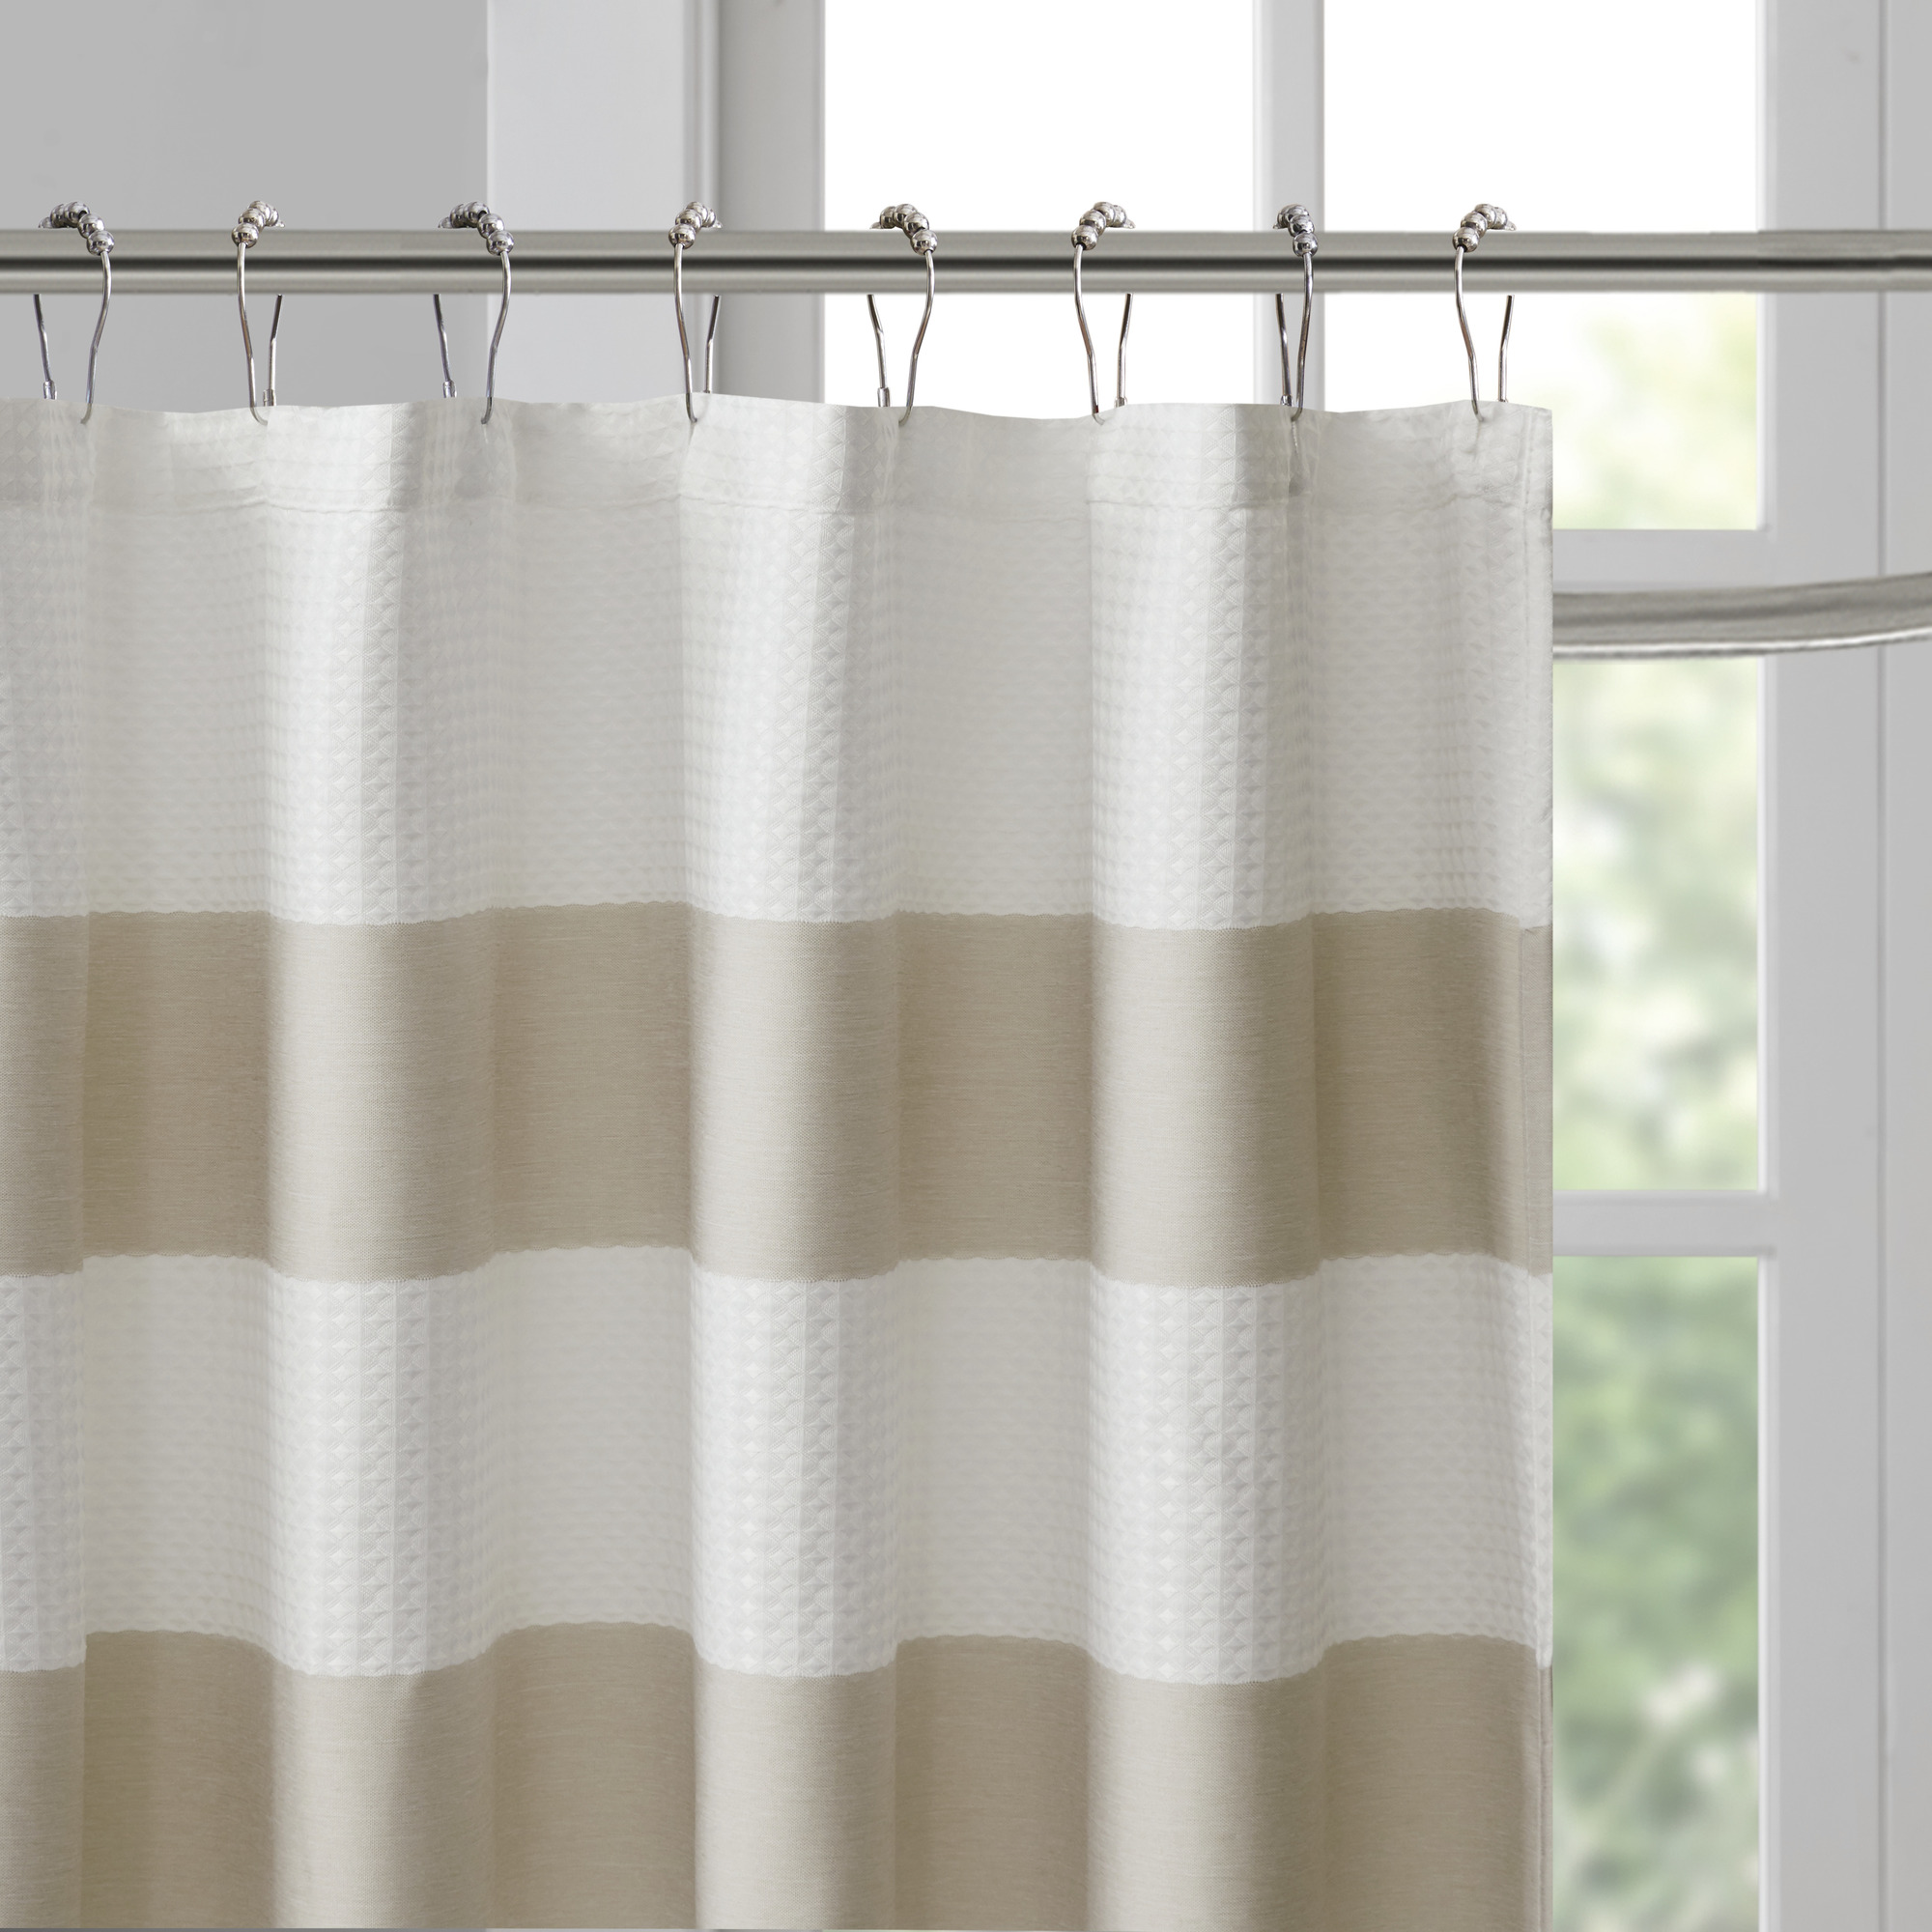 Home Essence Spa Waffle Shower Curtain with 3M Treatment, Taupe - image 2 of 4